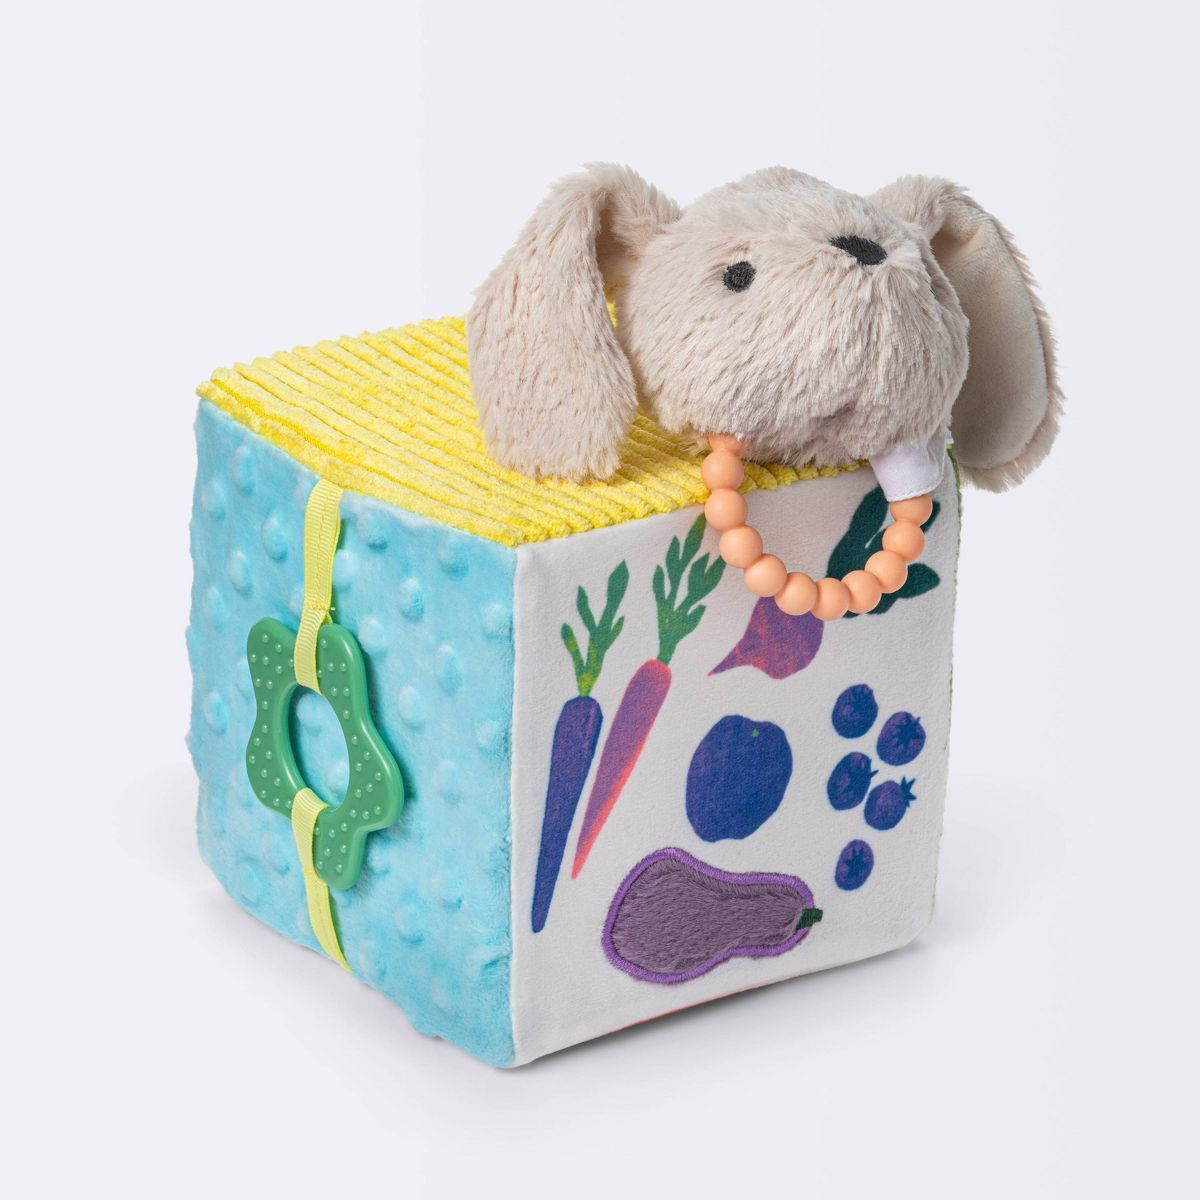 Fruit and Vegetable Interactive Plush Cube with Rabbit Rattle - Cloud Island™ | Target